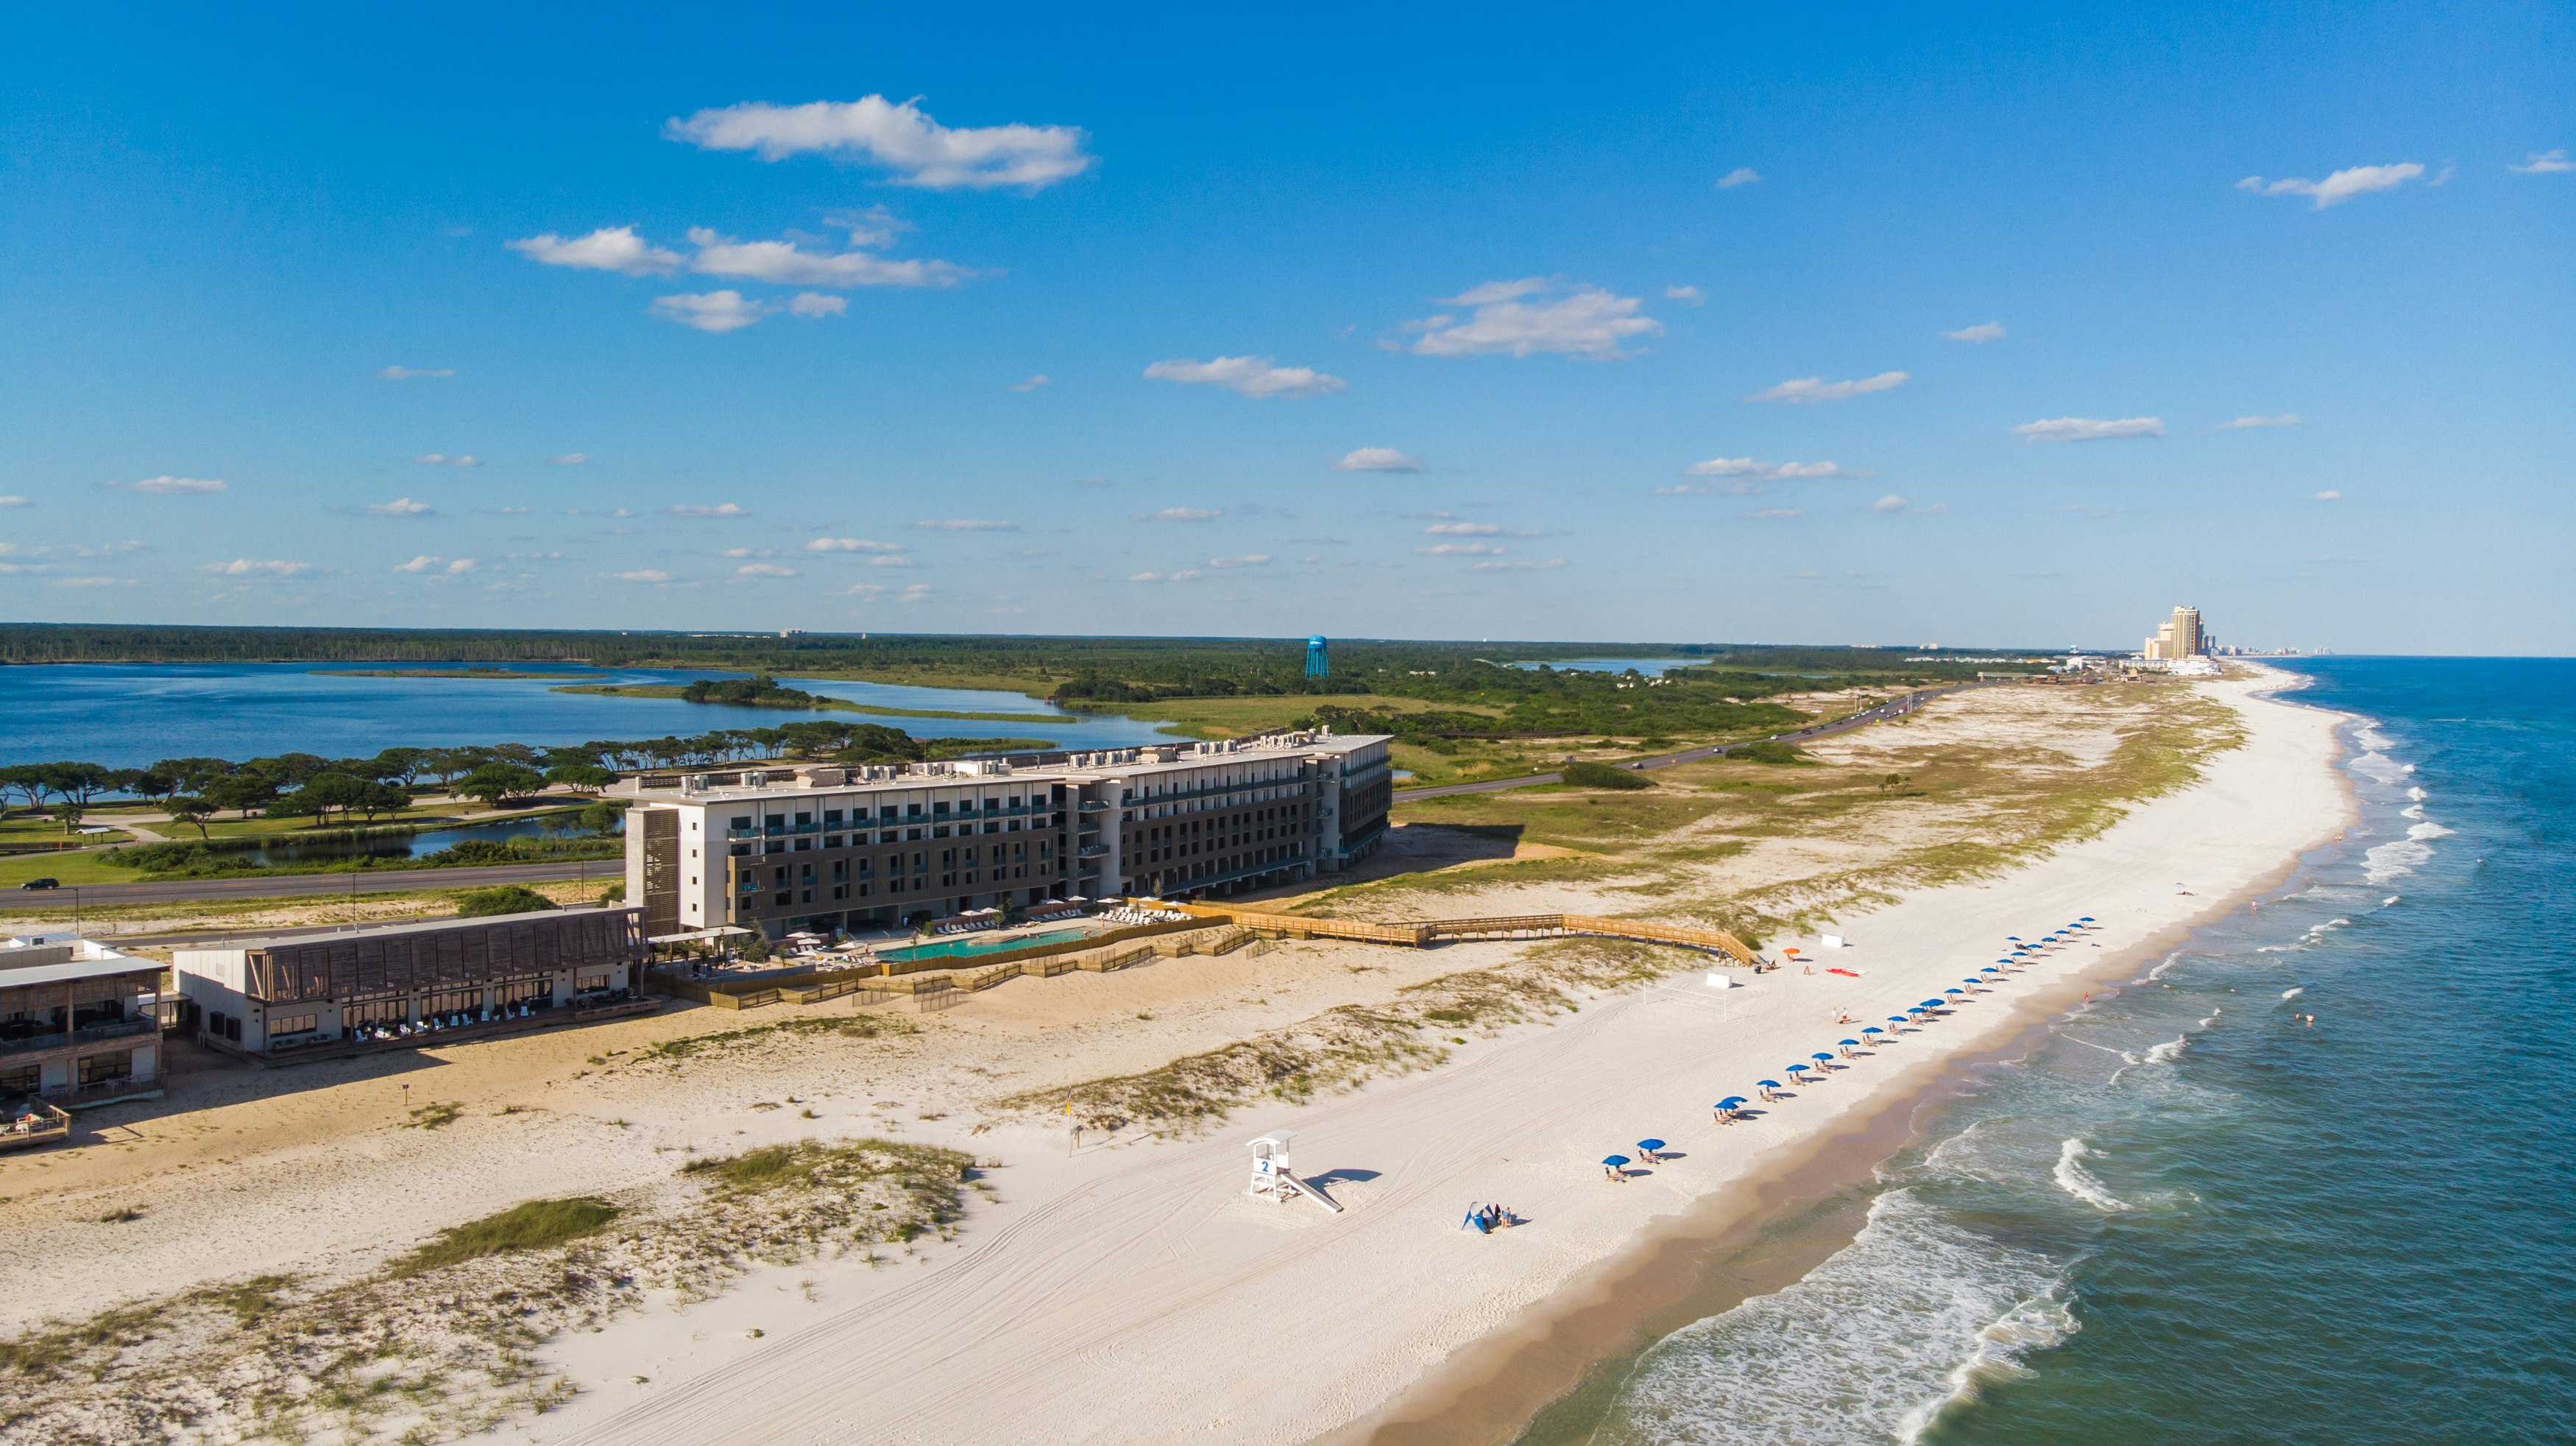 A strip of near-white sand runs alongside a grassy coastline; there is a very large but understated modern hotel set back from the beach. Behind this a lake can be seen.